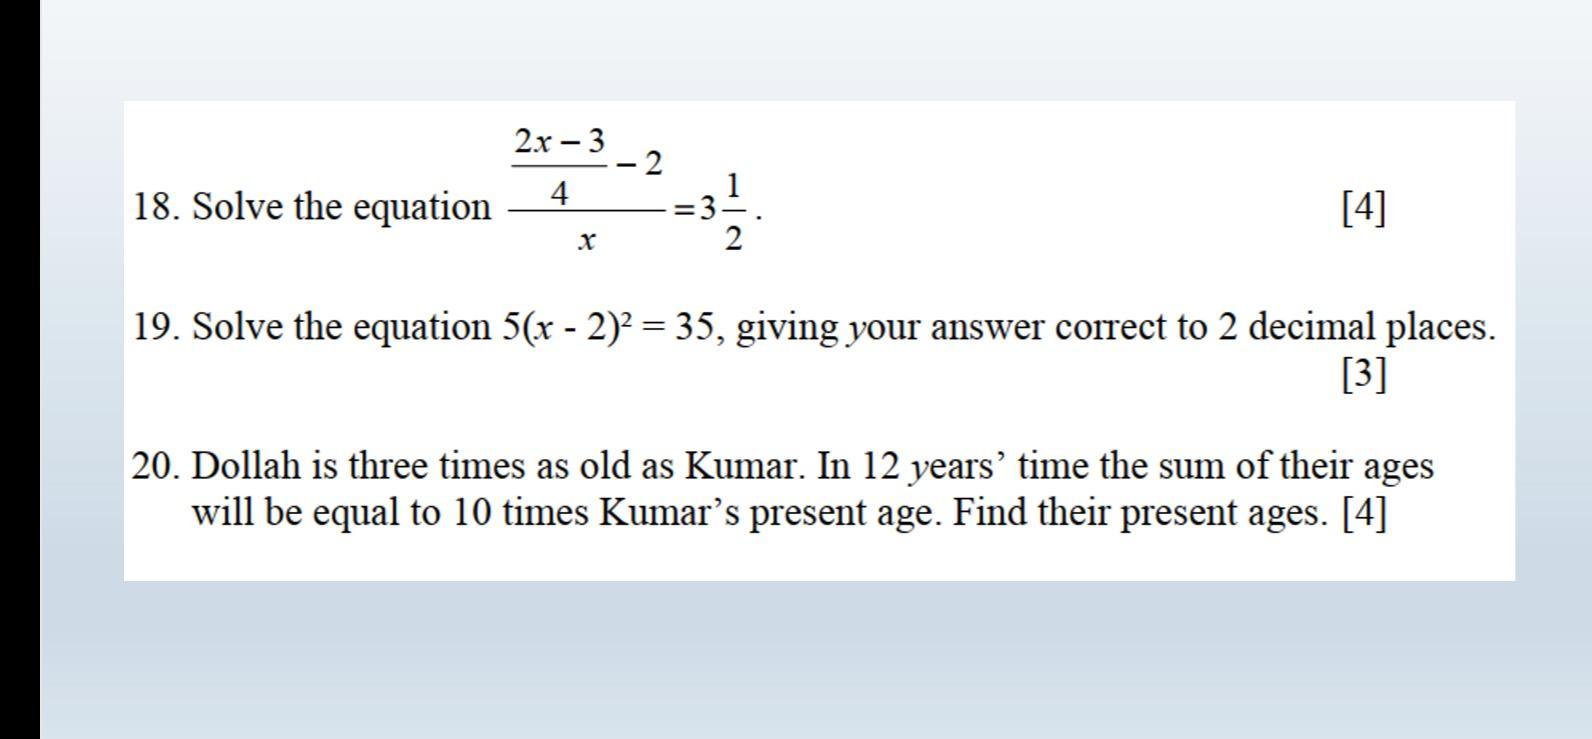 18. Solve the equation 2x-3 4 -2 I 2 [4] 19. Solve the equation 5(x - 2) = 35, giving your answer correct to